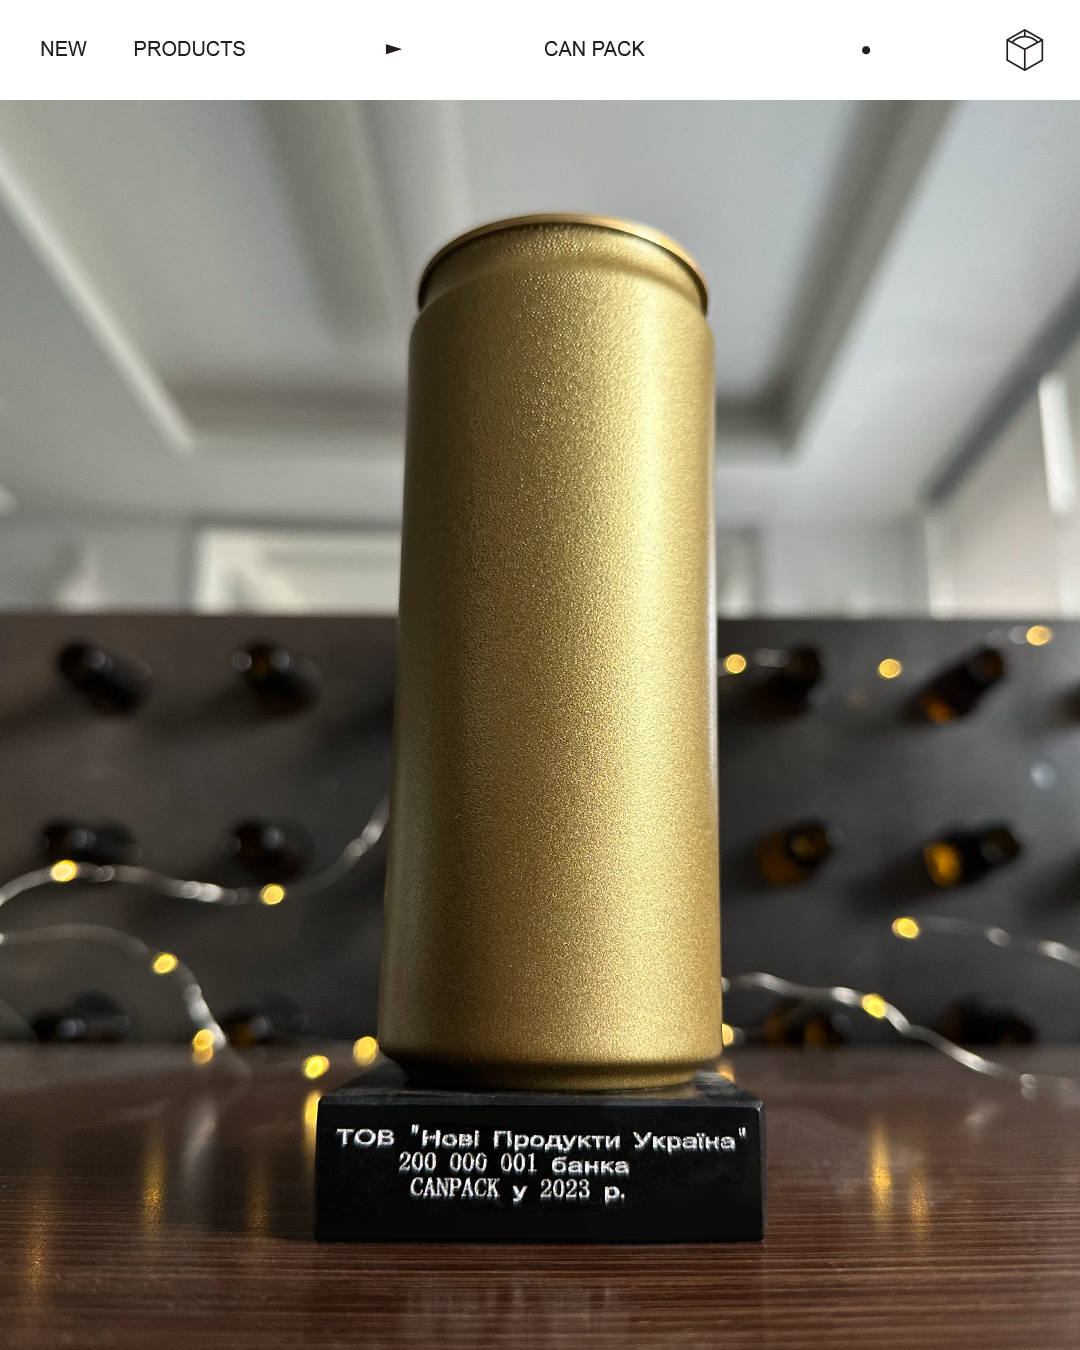 200 Million Cans in 2023! CanPack Group Awards New Products Group with Golden Can